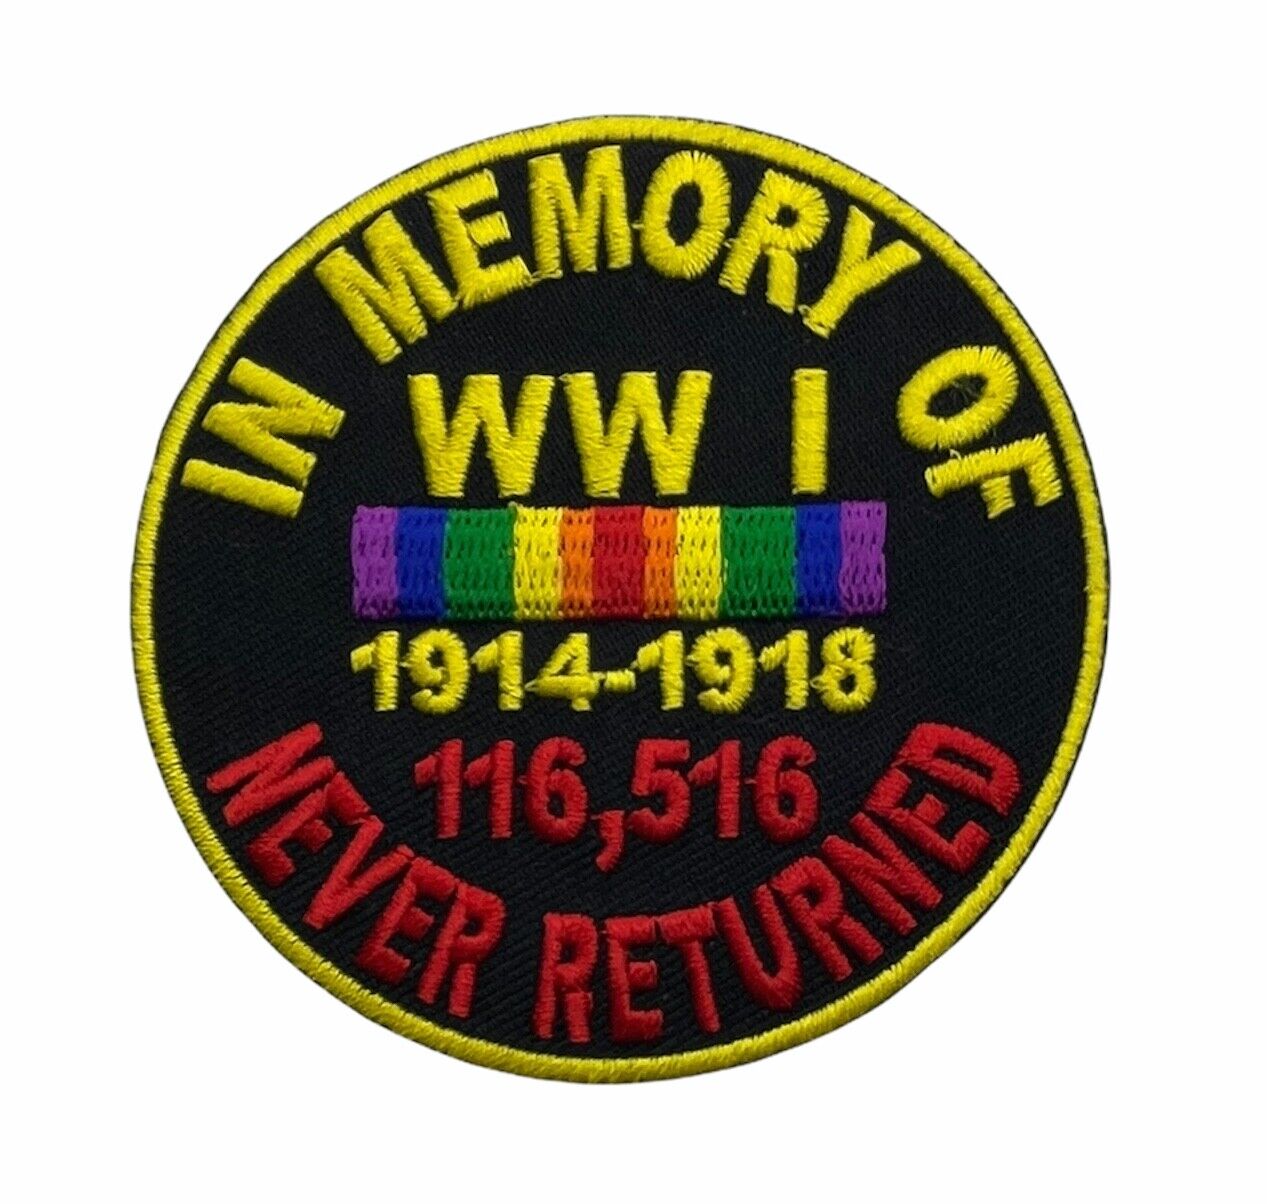 WW1 WWI  In Memory of Never Returned 3 Inch Iron on Biker Patch IV4867 F4D24O